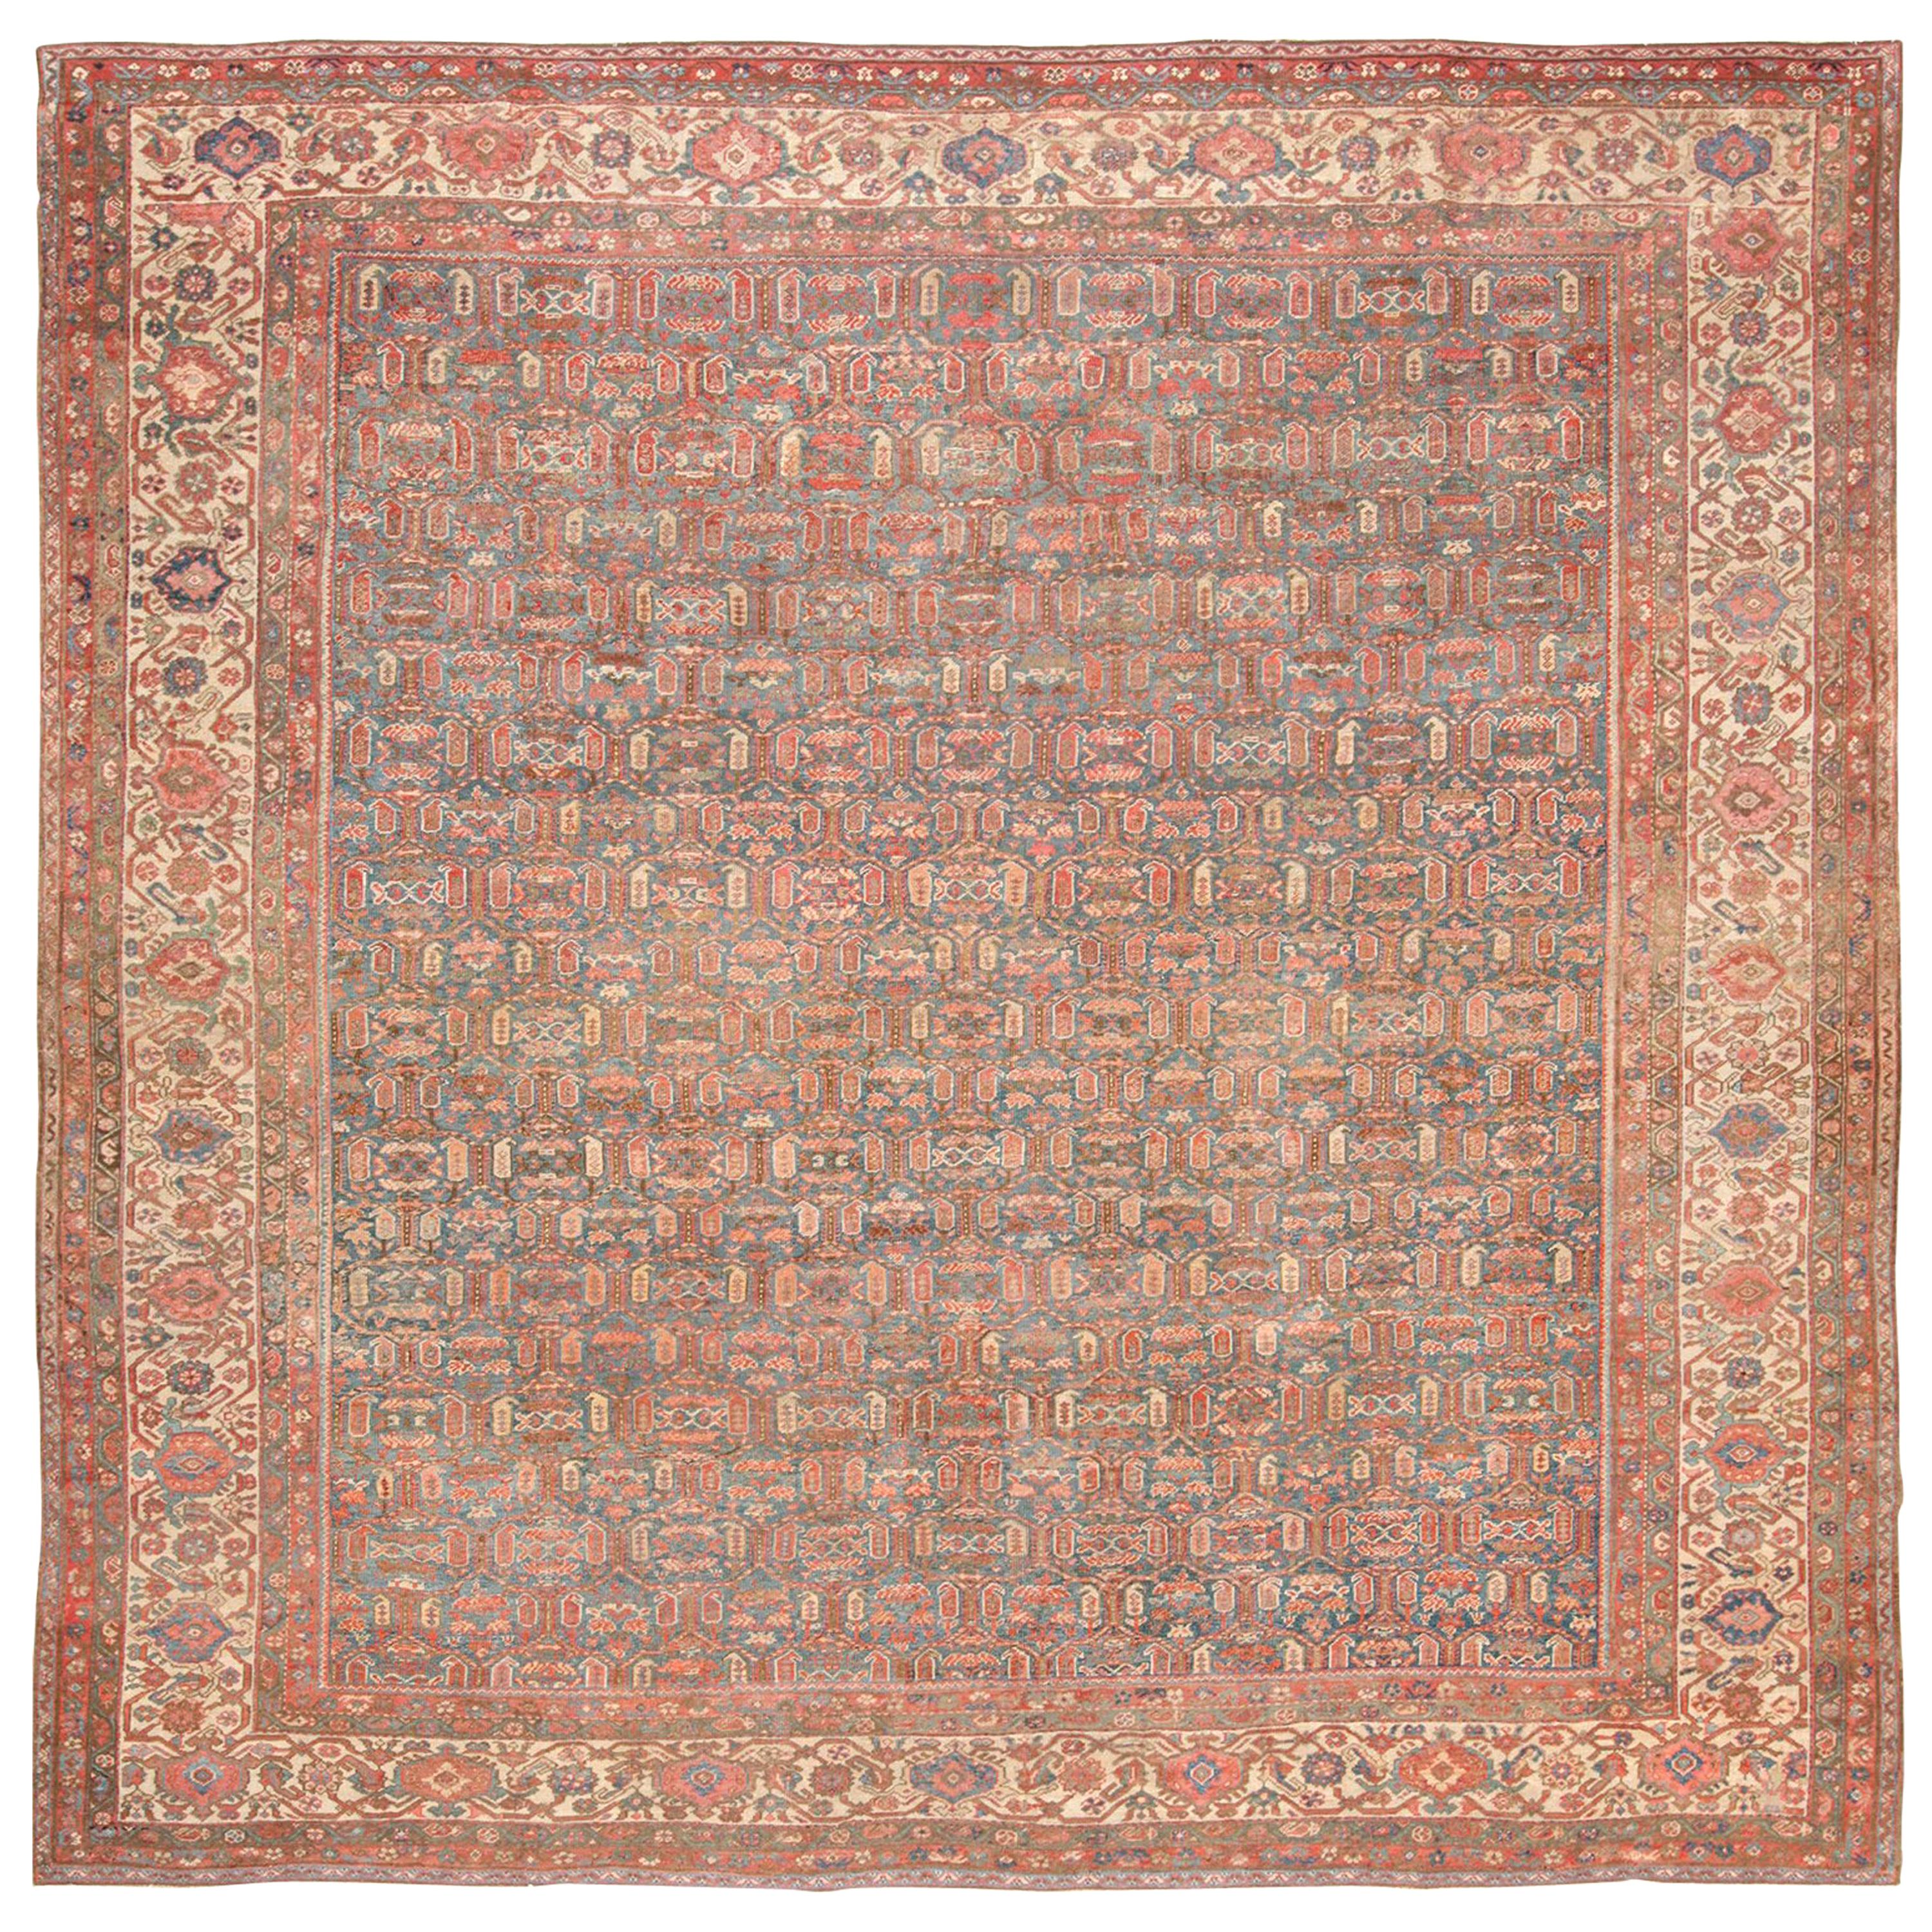 Square Antique Bakshaish Persian Rug. Size: 11 ft 4 in x 11 ft 8 in